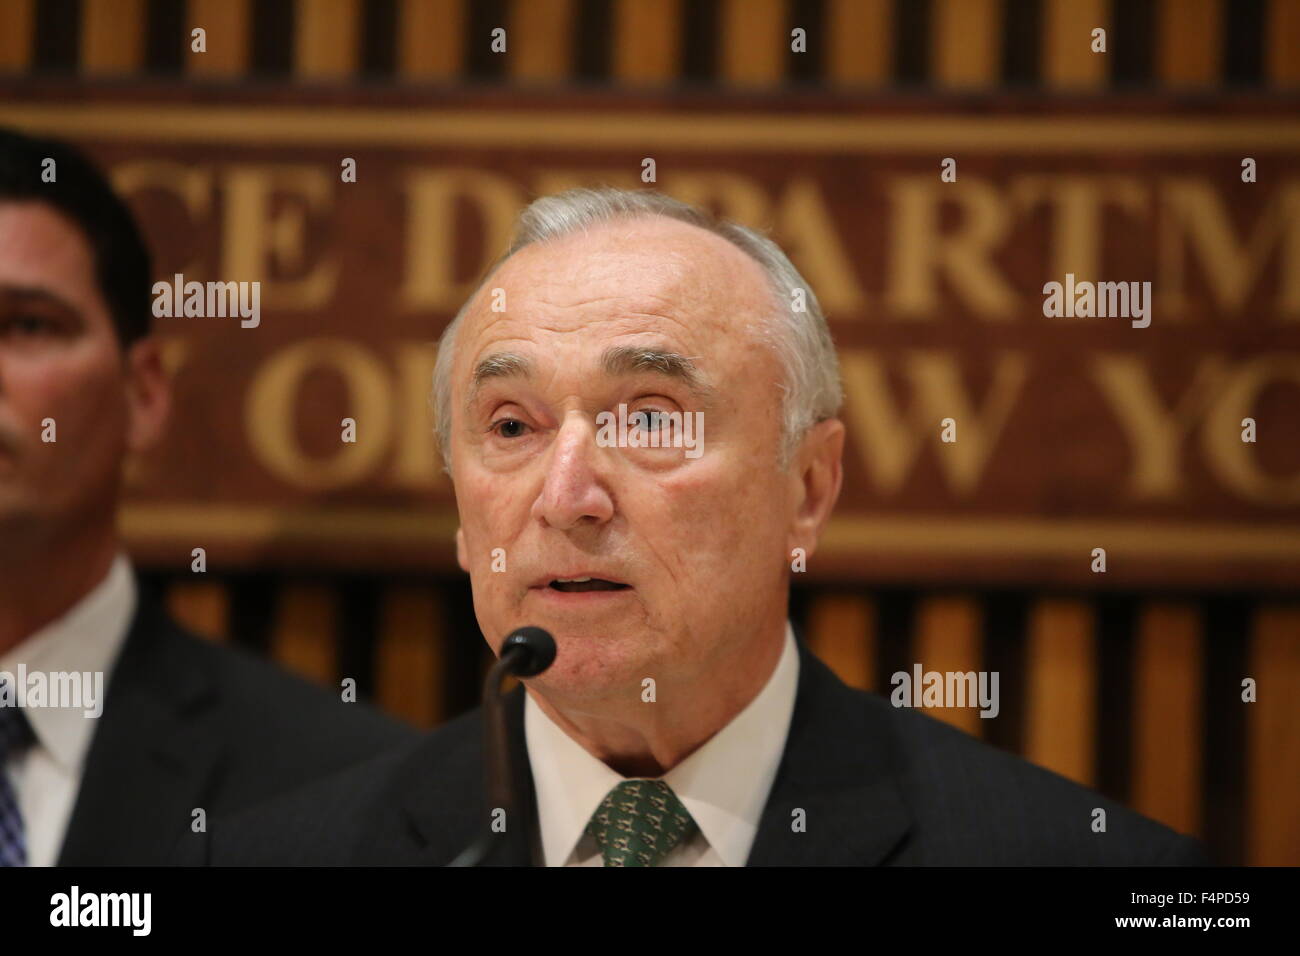 New York City, United States. 21st Oct, 2015. NYPD commissioner William Bratton opens press conference. Mayor de Blasio and NYPD commissioner William Bratton led a press conference to update the investigation into the shooting death of officer Randolph Holder by Tyrone Howard. Credit:  Andy Katz/Pacific Press/Alamy Live News Stock Photo